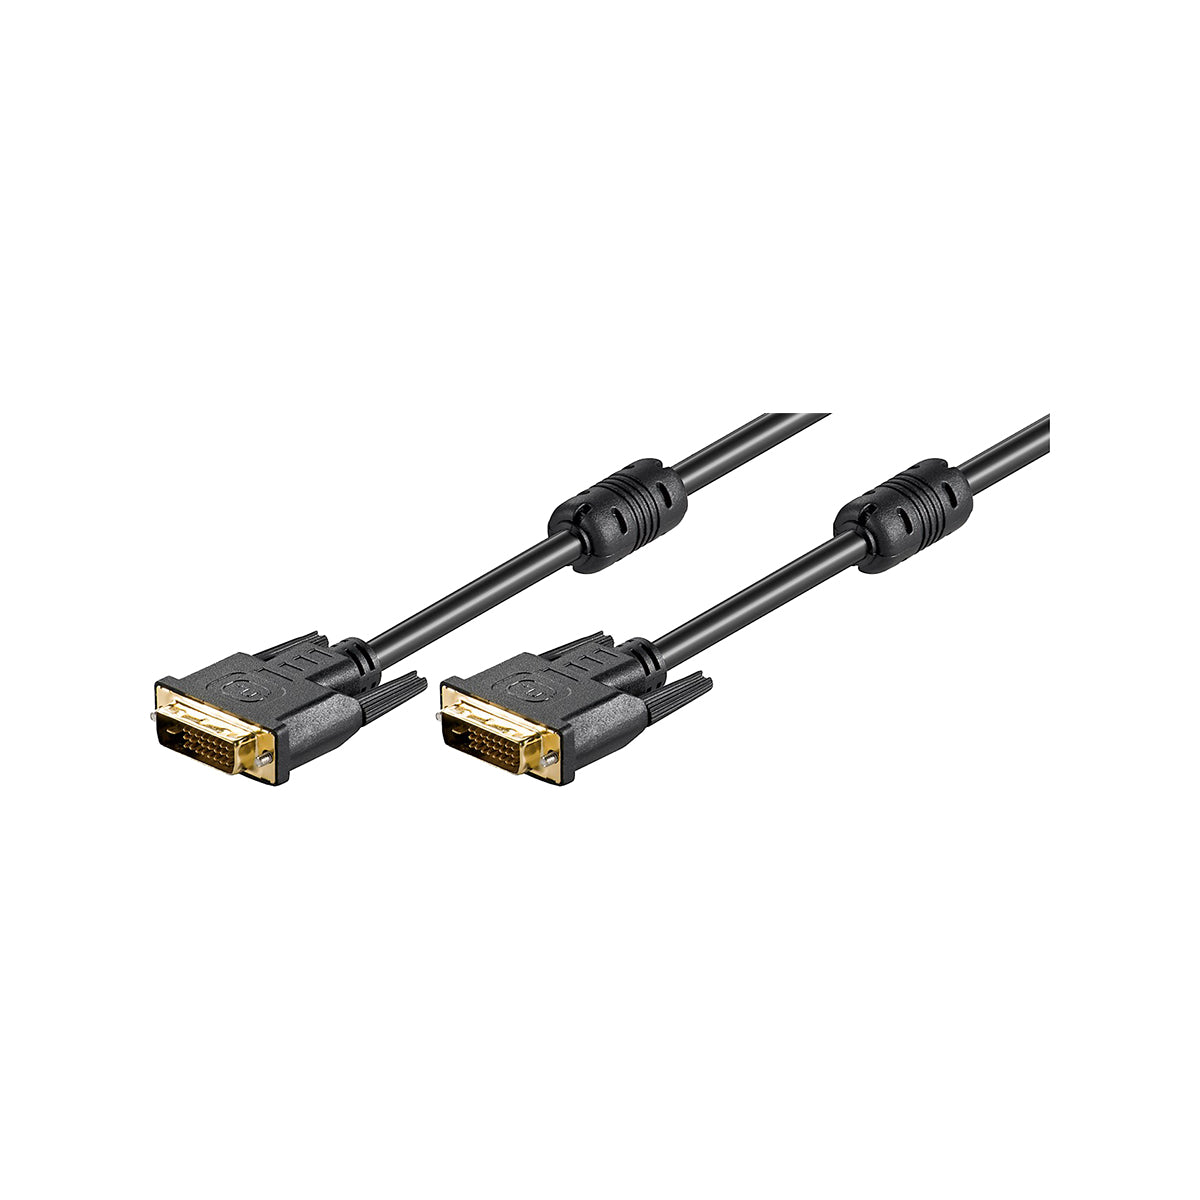 Goobay DVI-D Full HD Cable Dual Link, Gold-Plated Cable 15 m for Monitors/Projectors